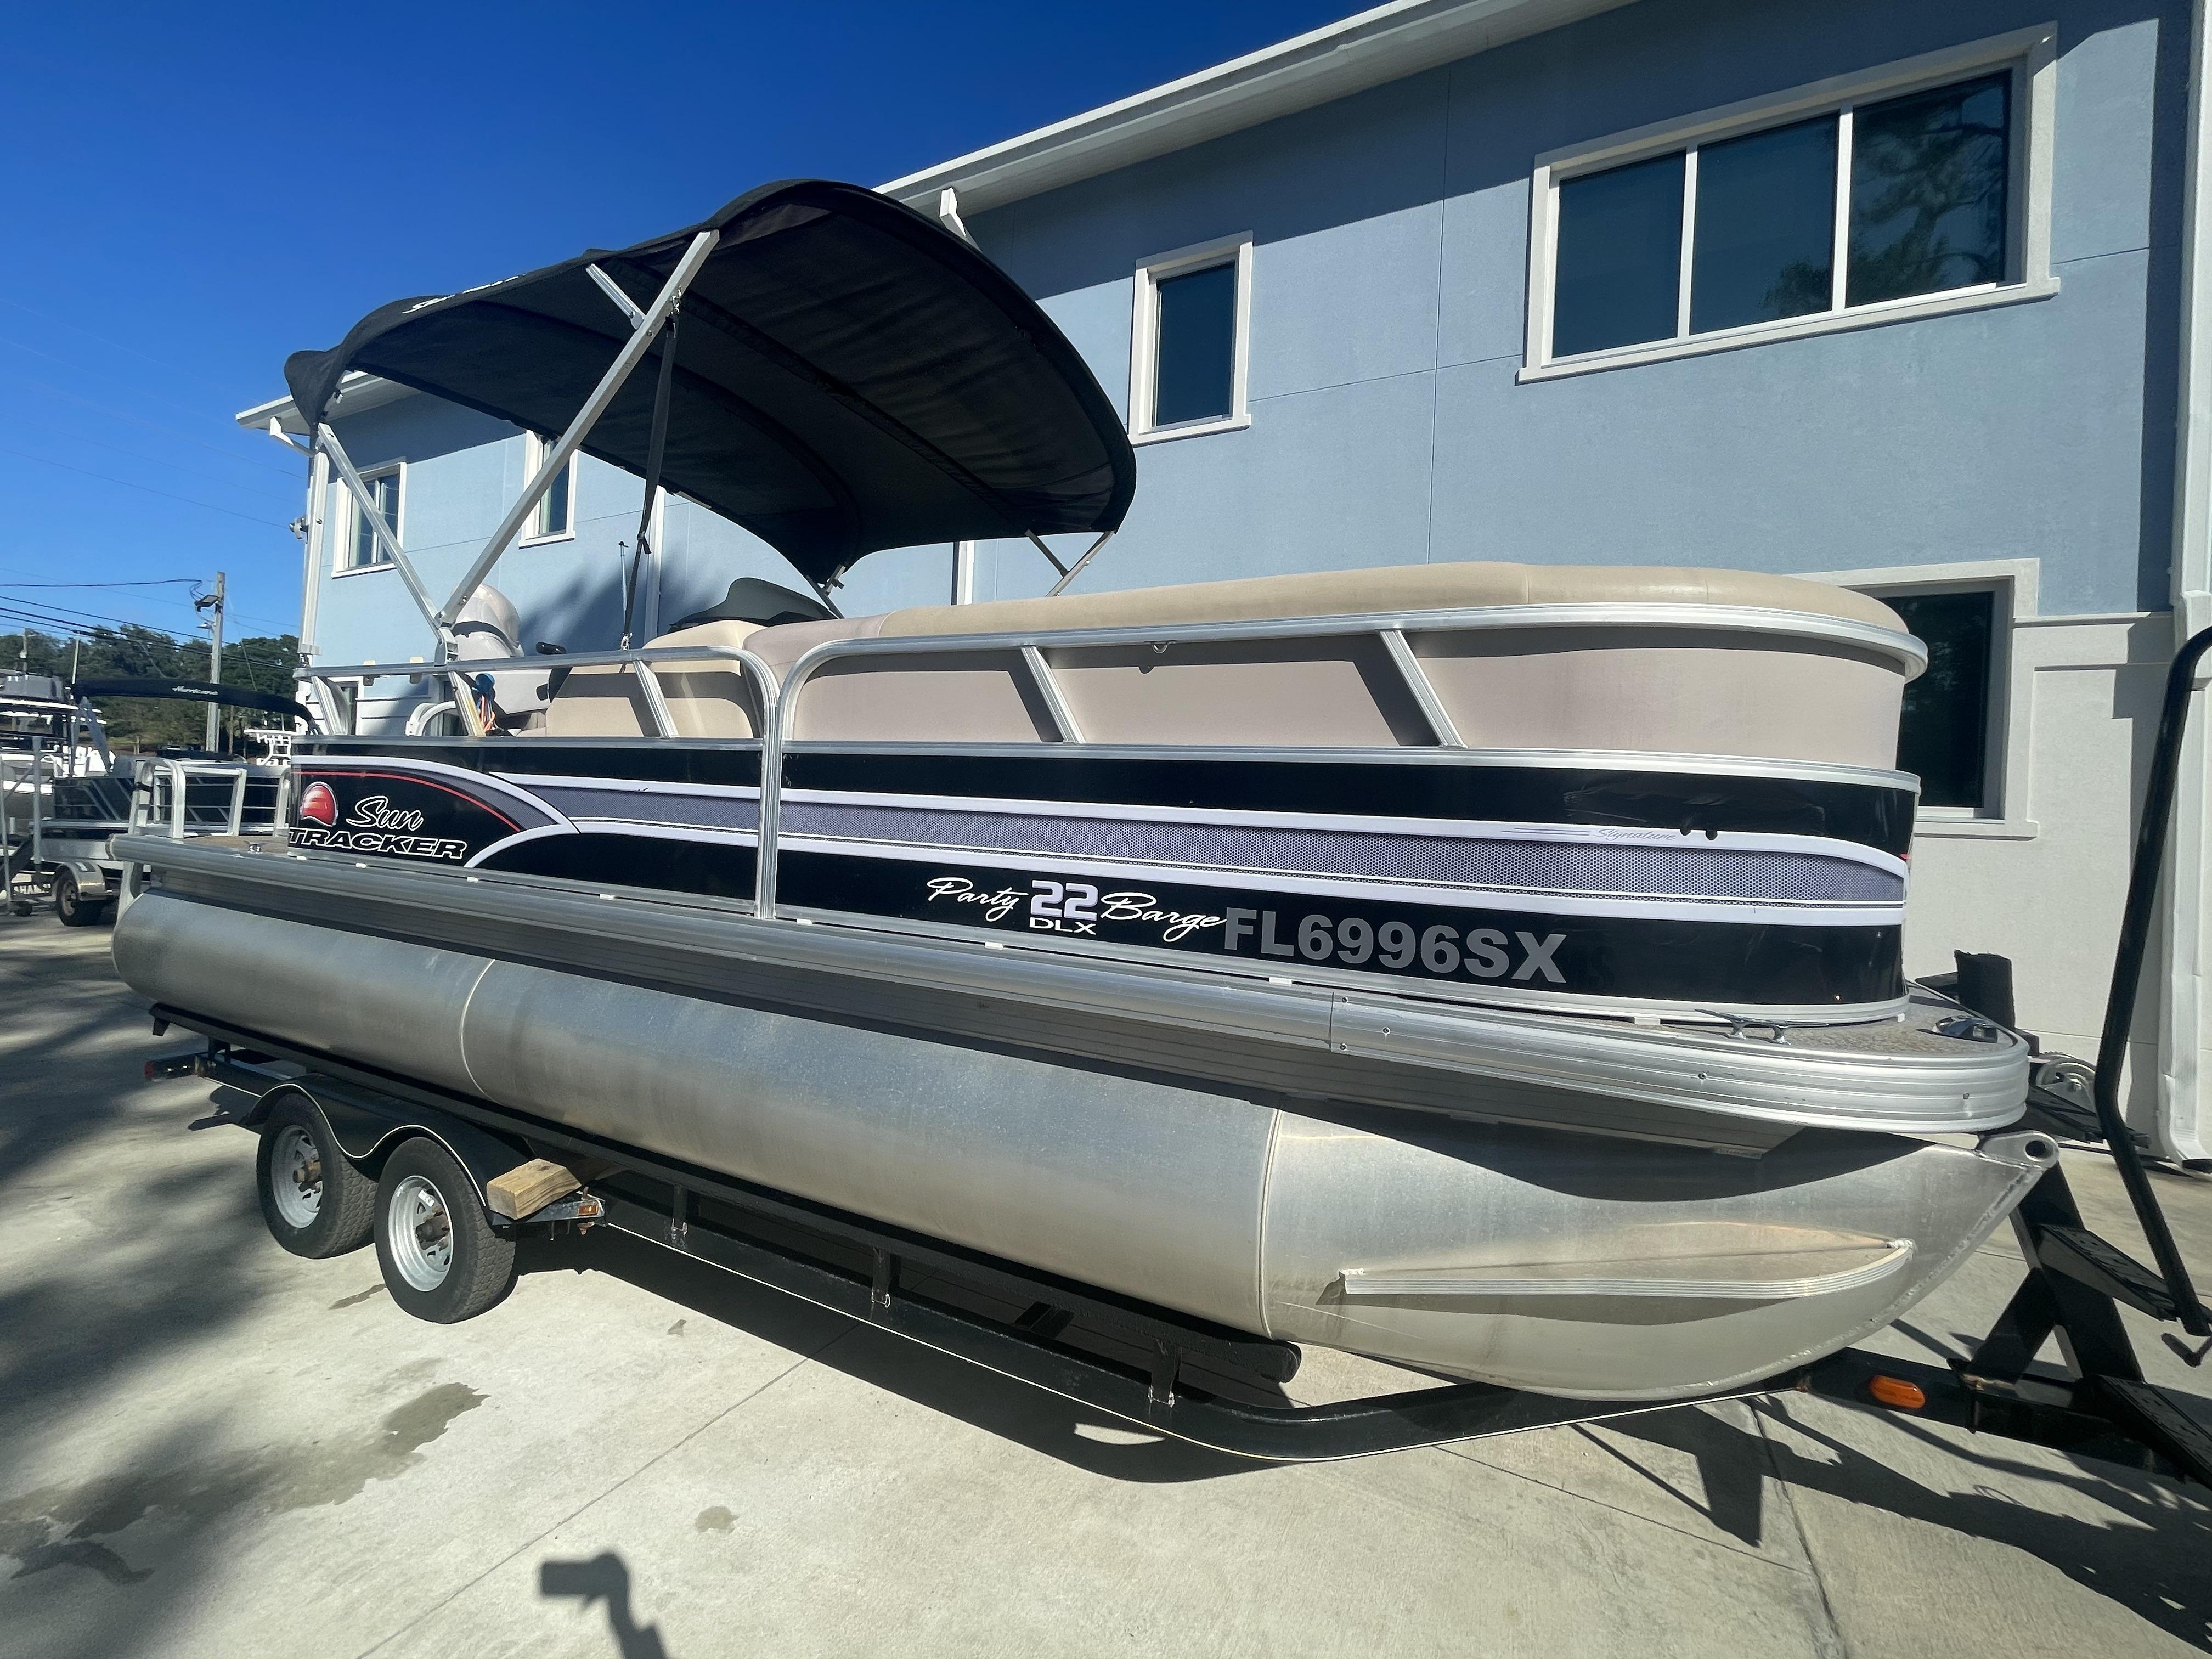 2015 Sun Tracker Party Barge 22 DLX Pontoon for sale - YachtWorld